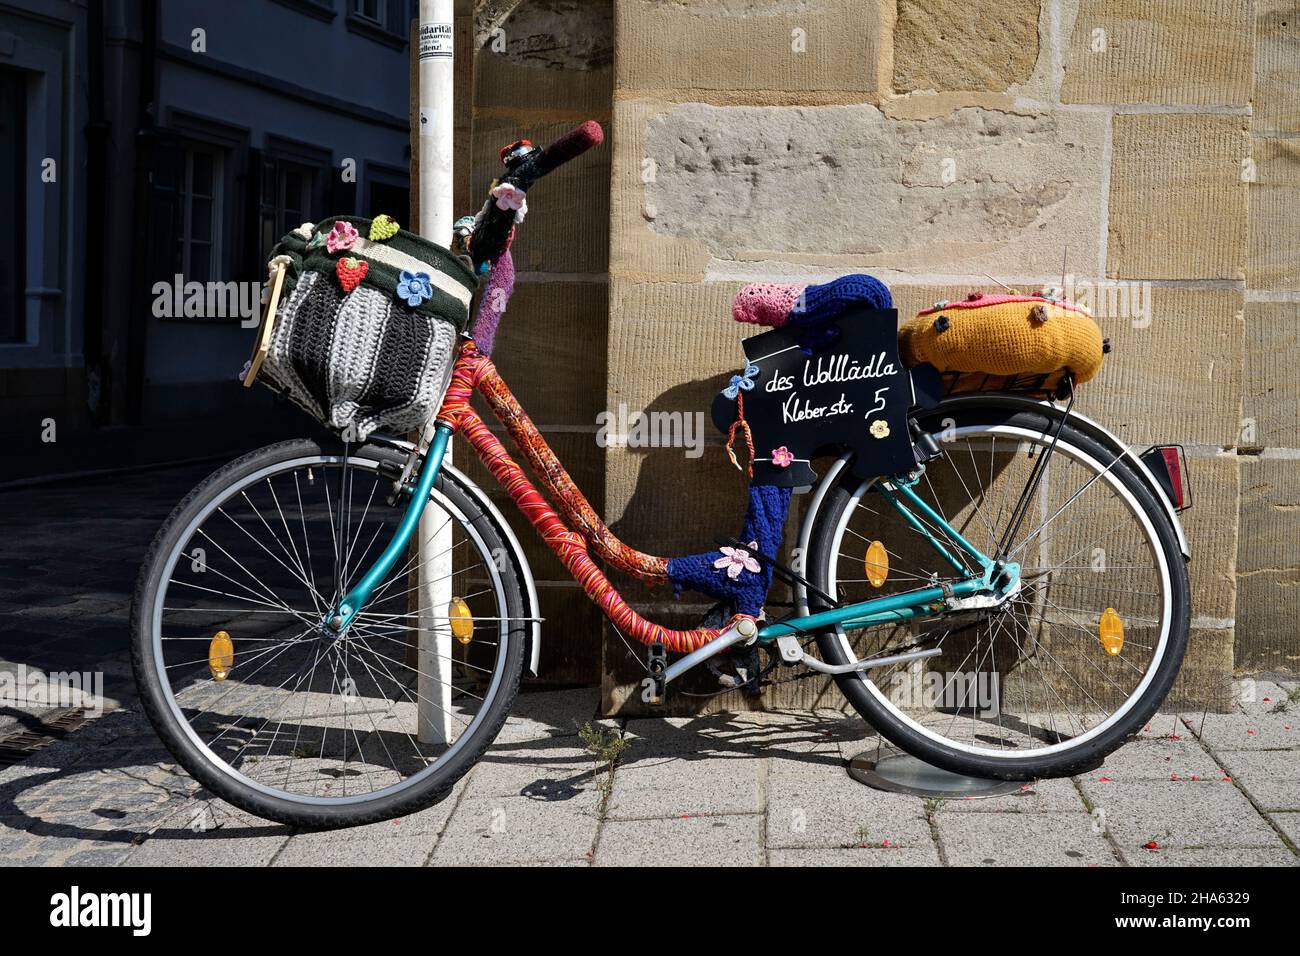 germany,bavaria,upper franconia,bamberg,old town,bicycle with knitted cover,advertisement for a wool shop Stock Photo